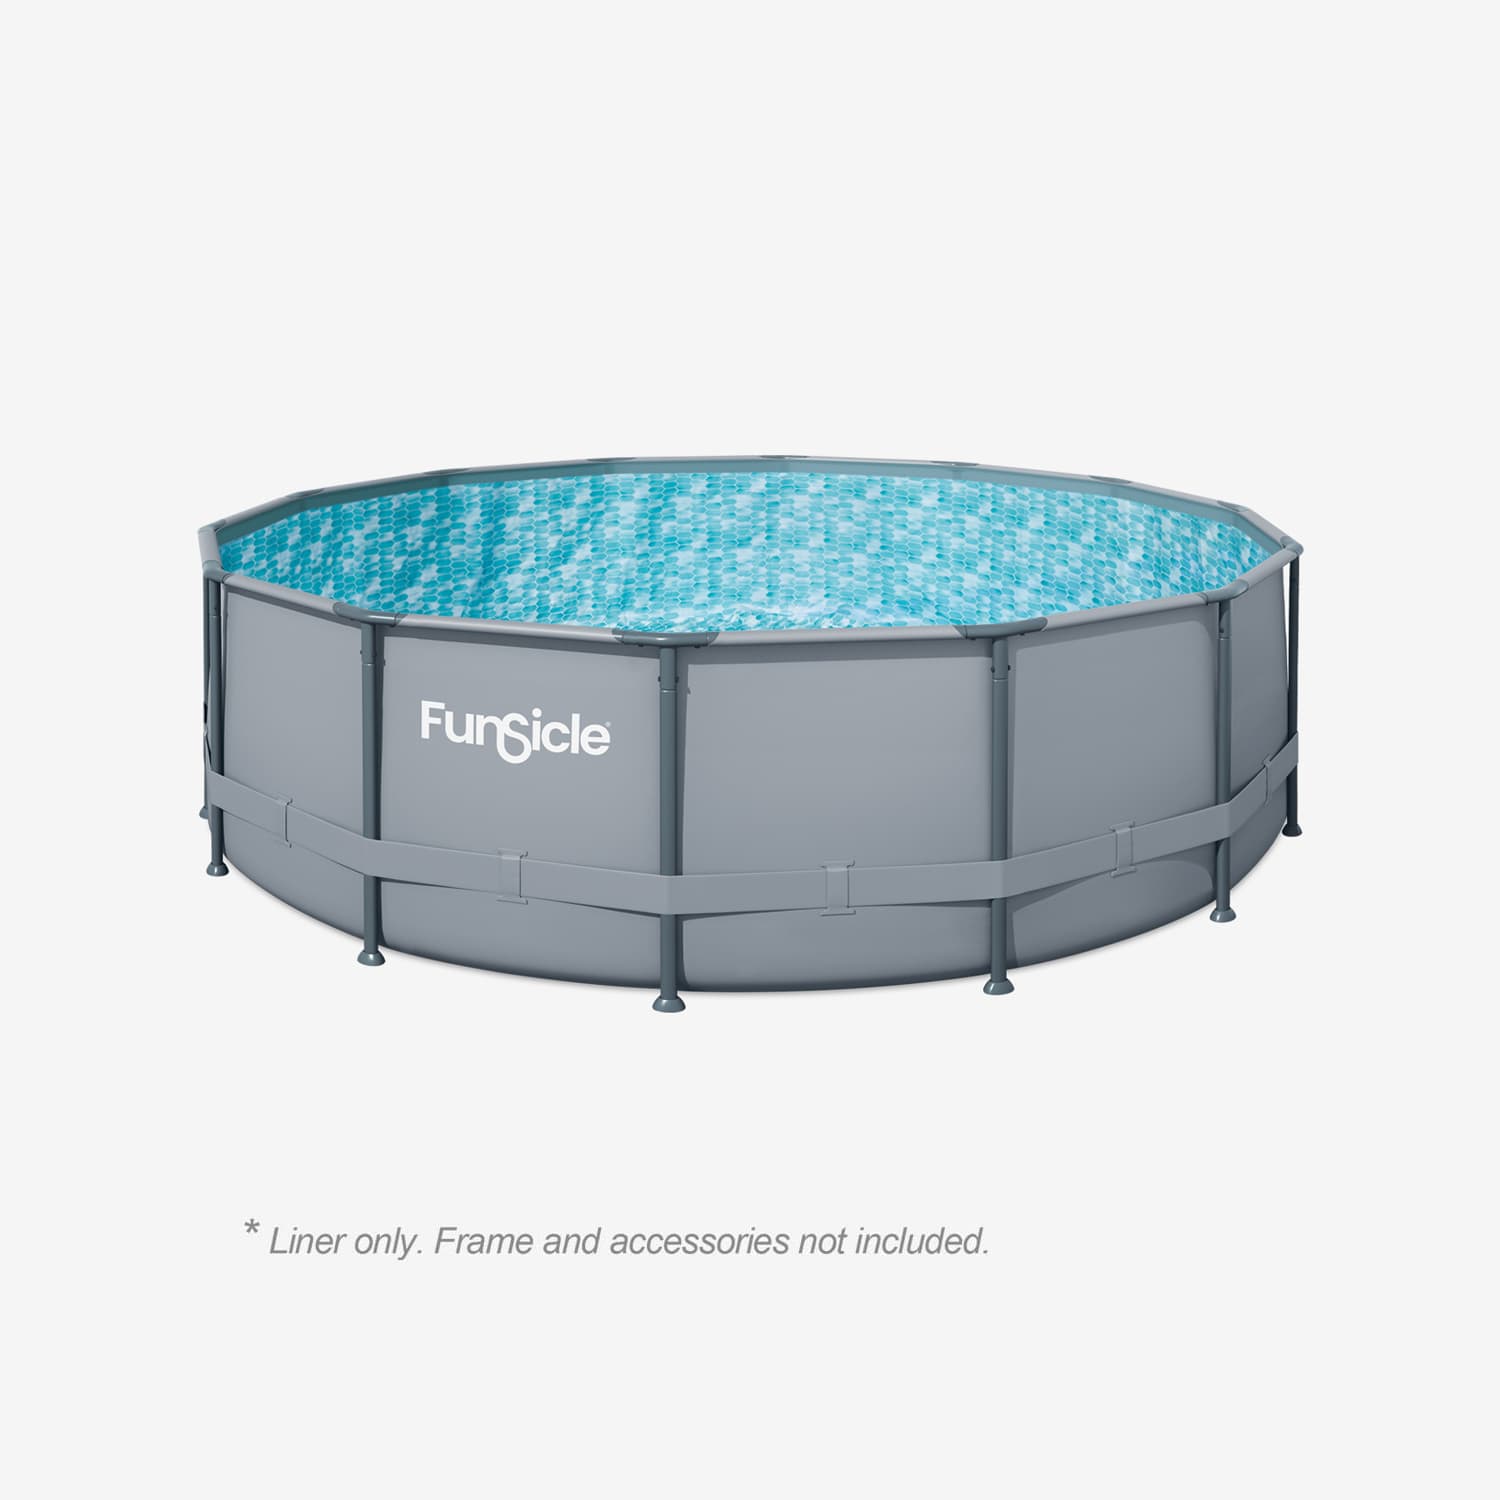  Funsicle 16 ft Oasis Pool Liner